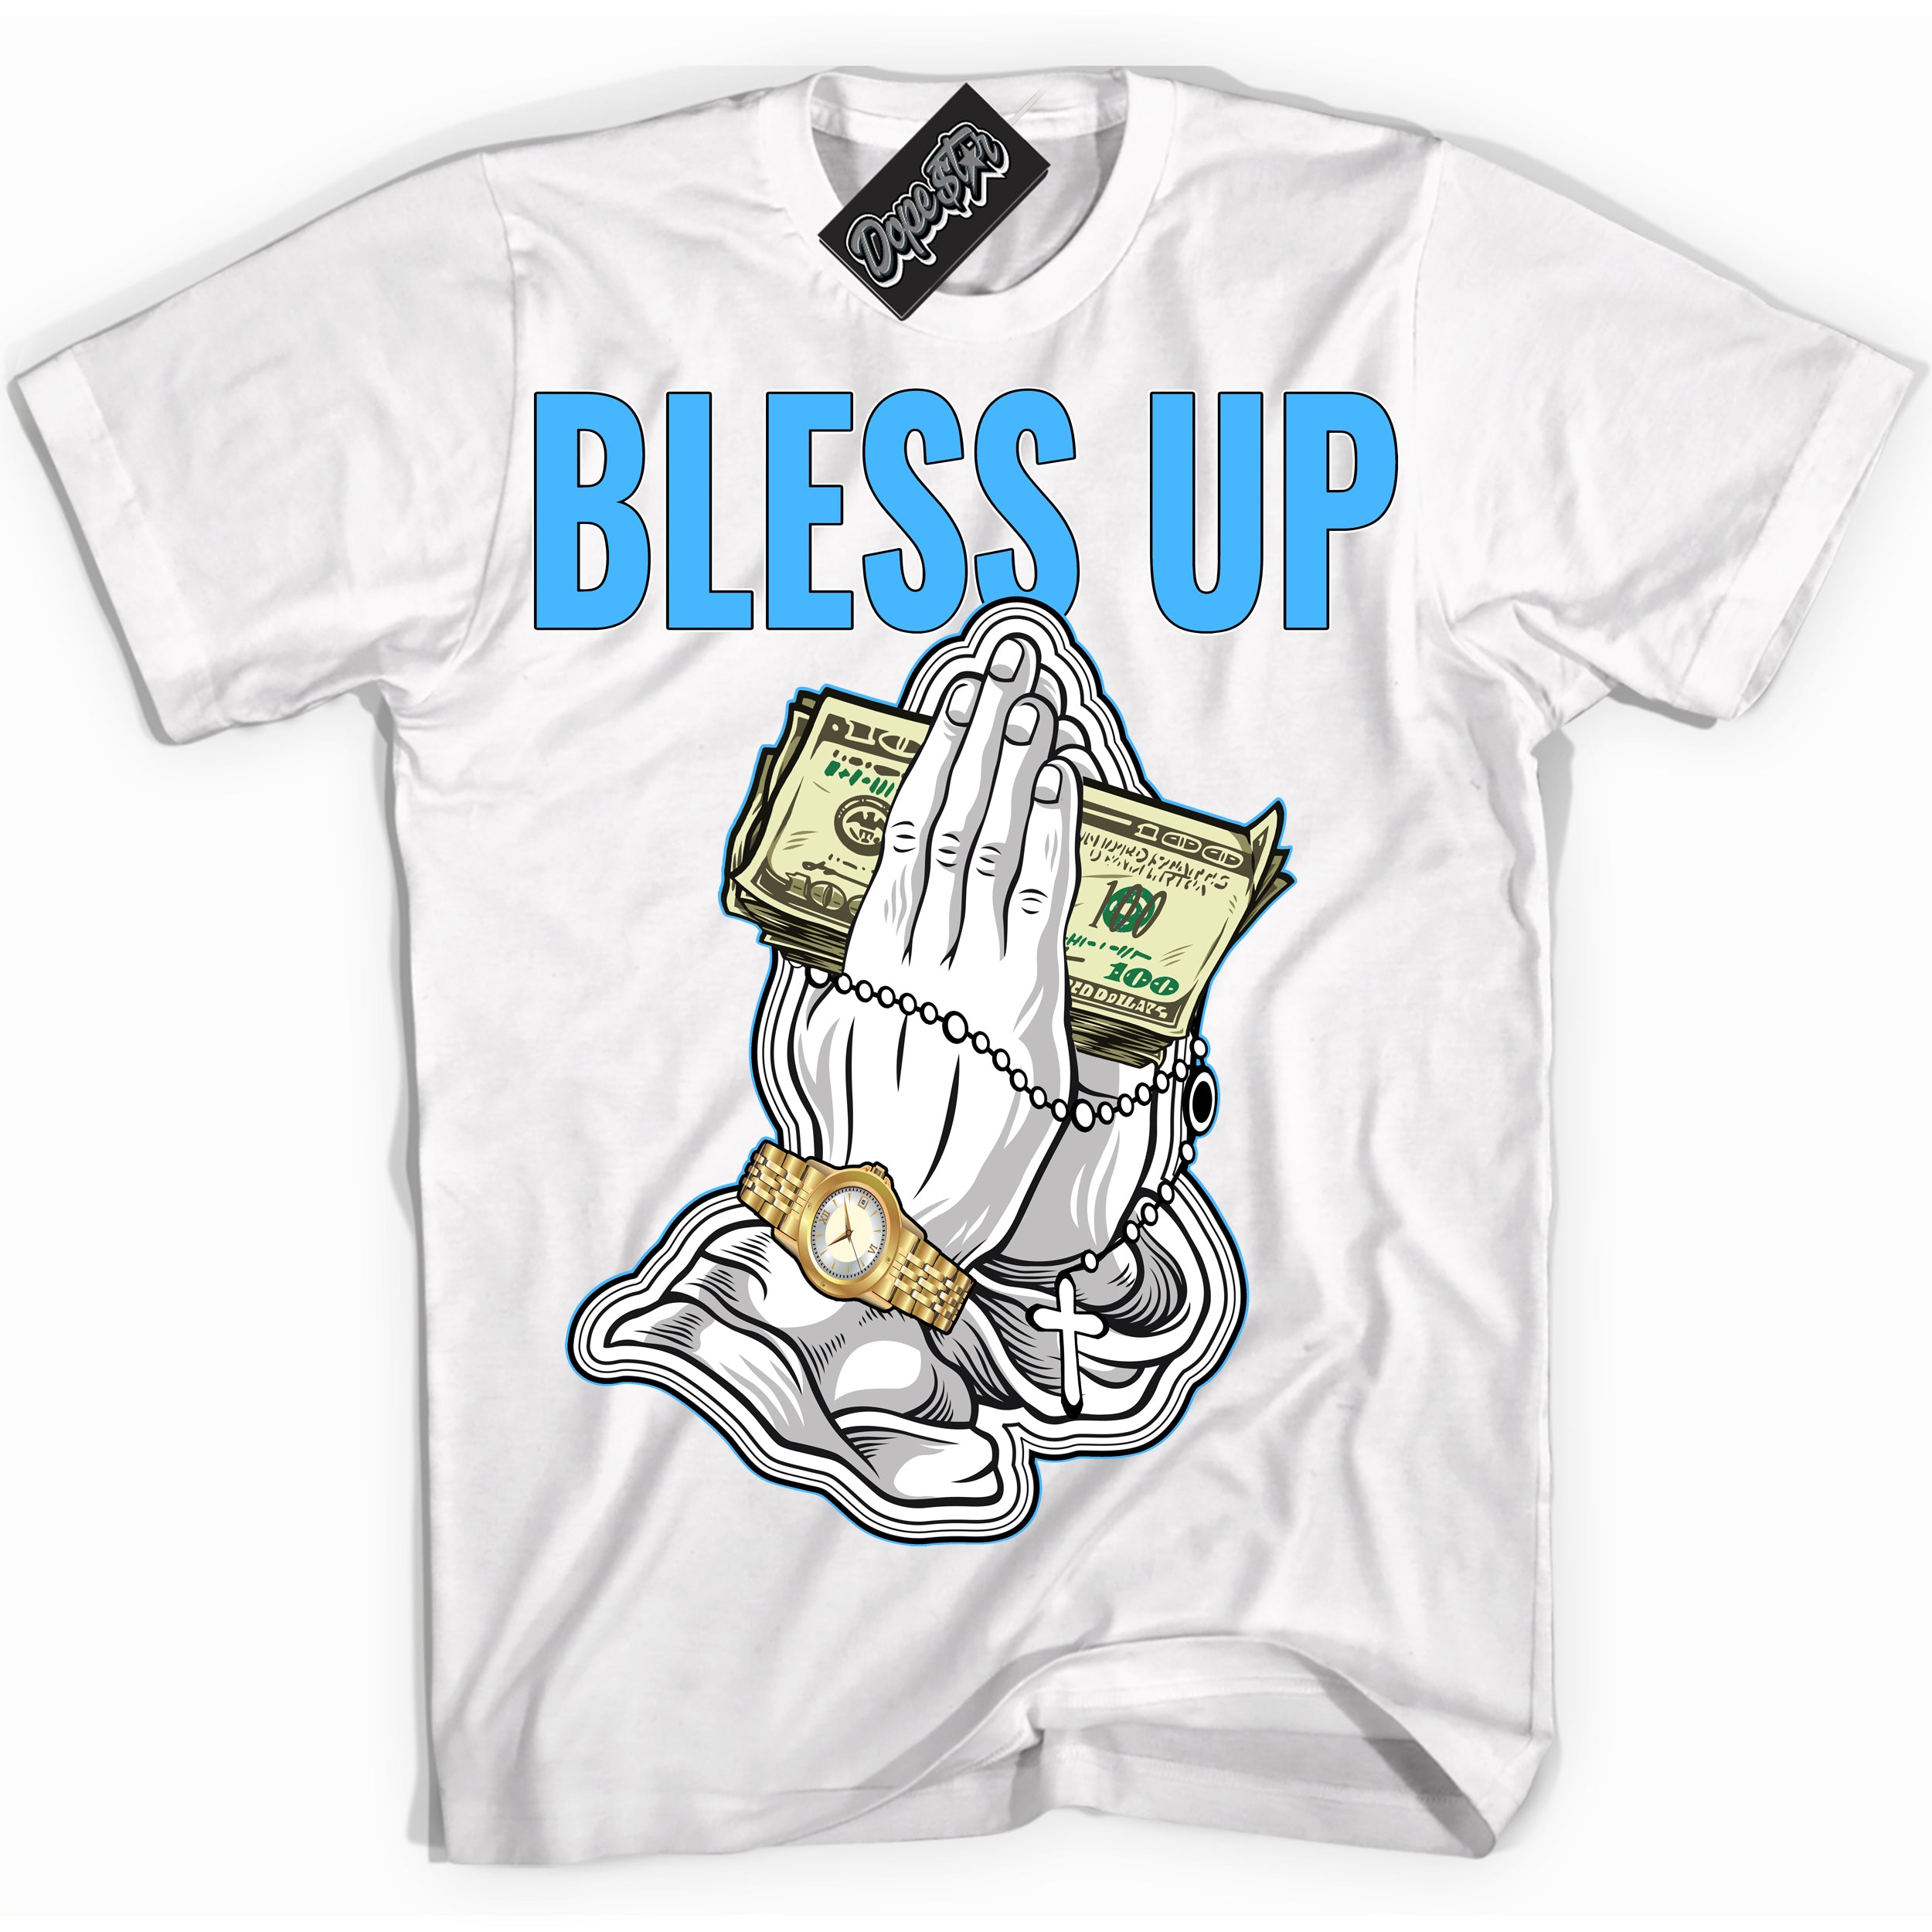 Cool White graphic tee with “ Bless Up ” design, that perfectly matches Powder Blue 9s sneakers 